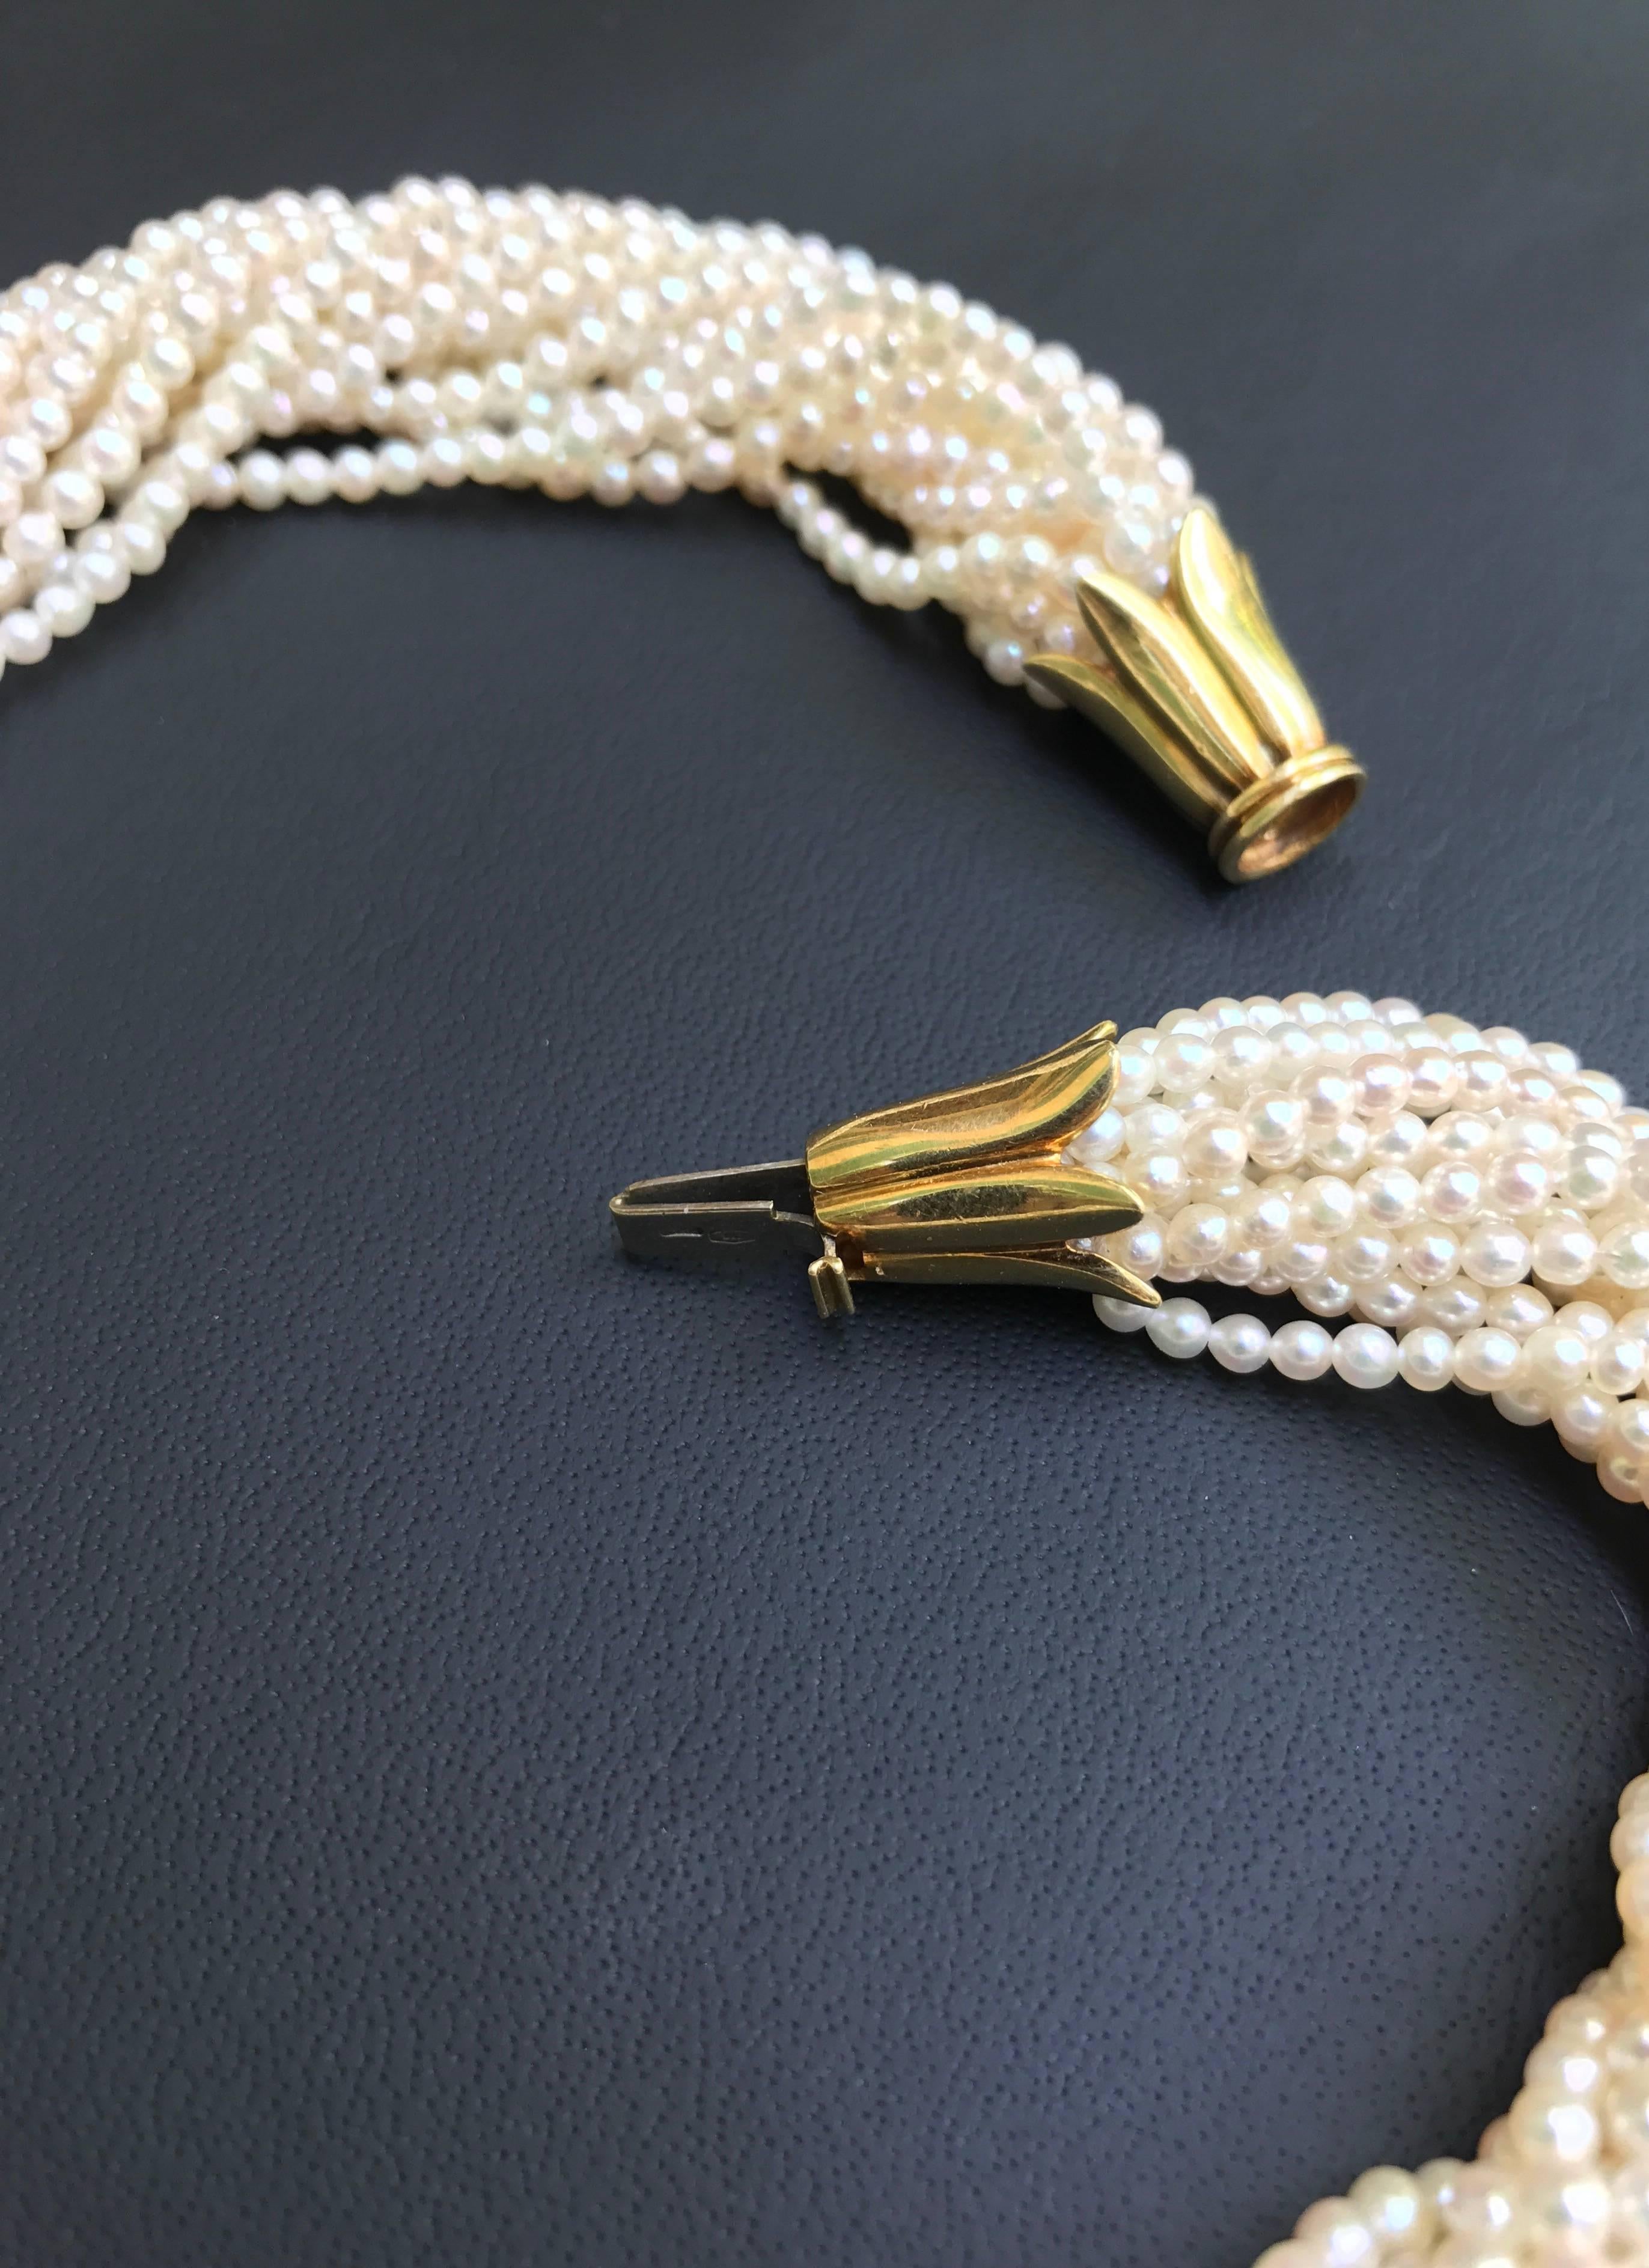 The perfect combination of pearl and the 18 kt gold clasp make this necklace a true standout. 
Elegant fifteen strand pearl Torsade twisting around each other create a thick necklace that has a timeless beauty.

All AVGVSTA jewelry is new and has